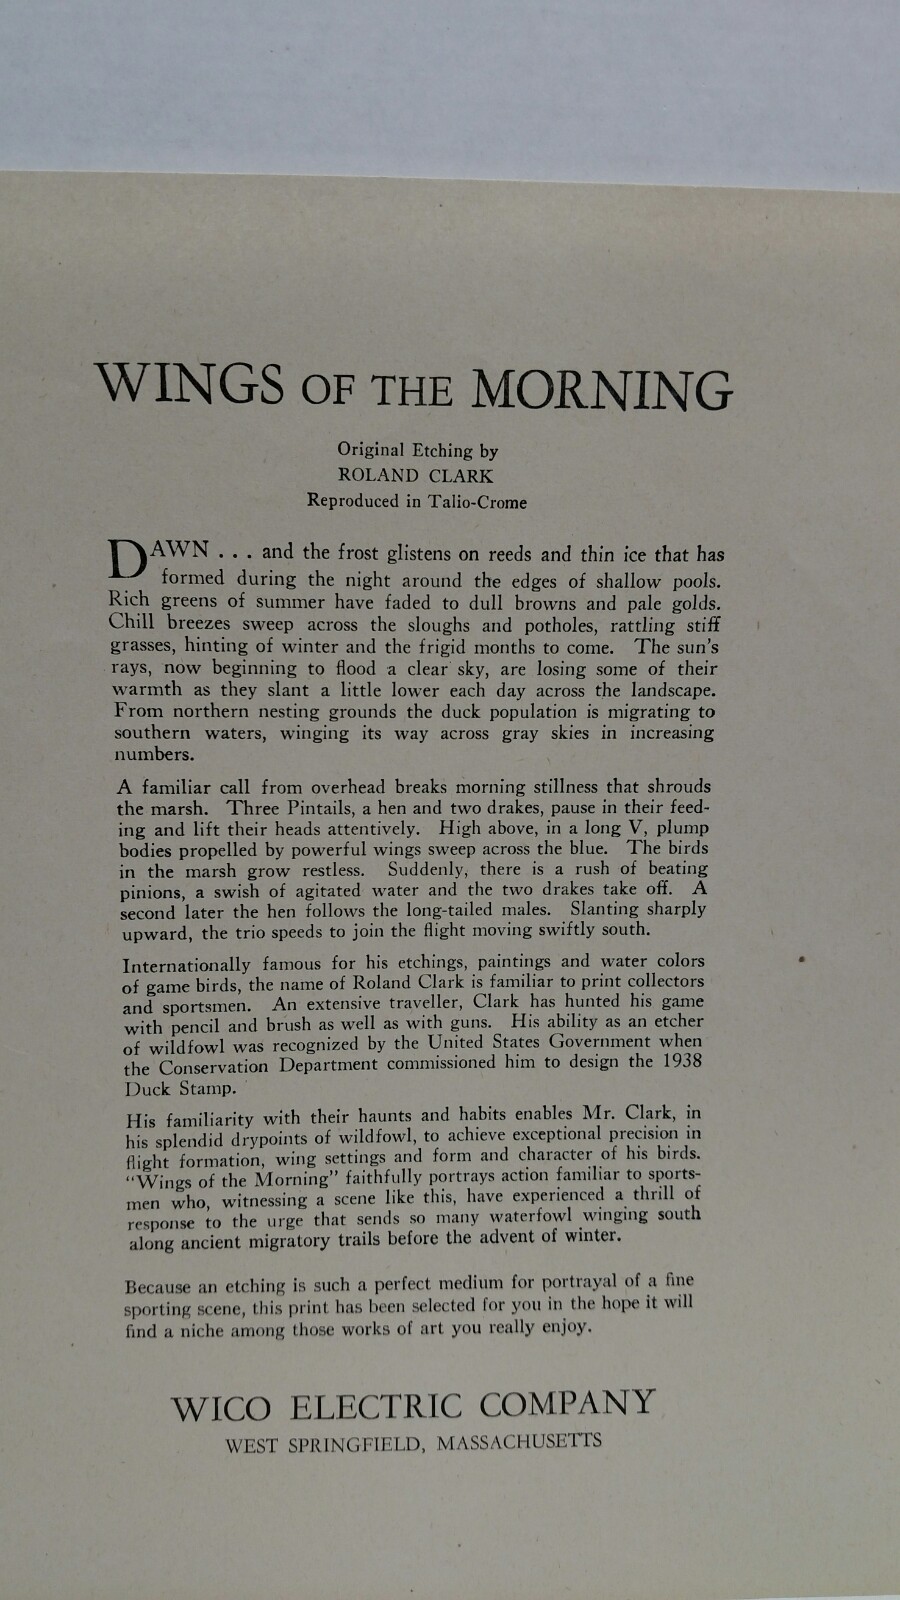 Image 1 of Wings of the Morning